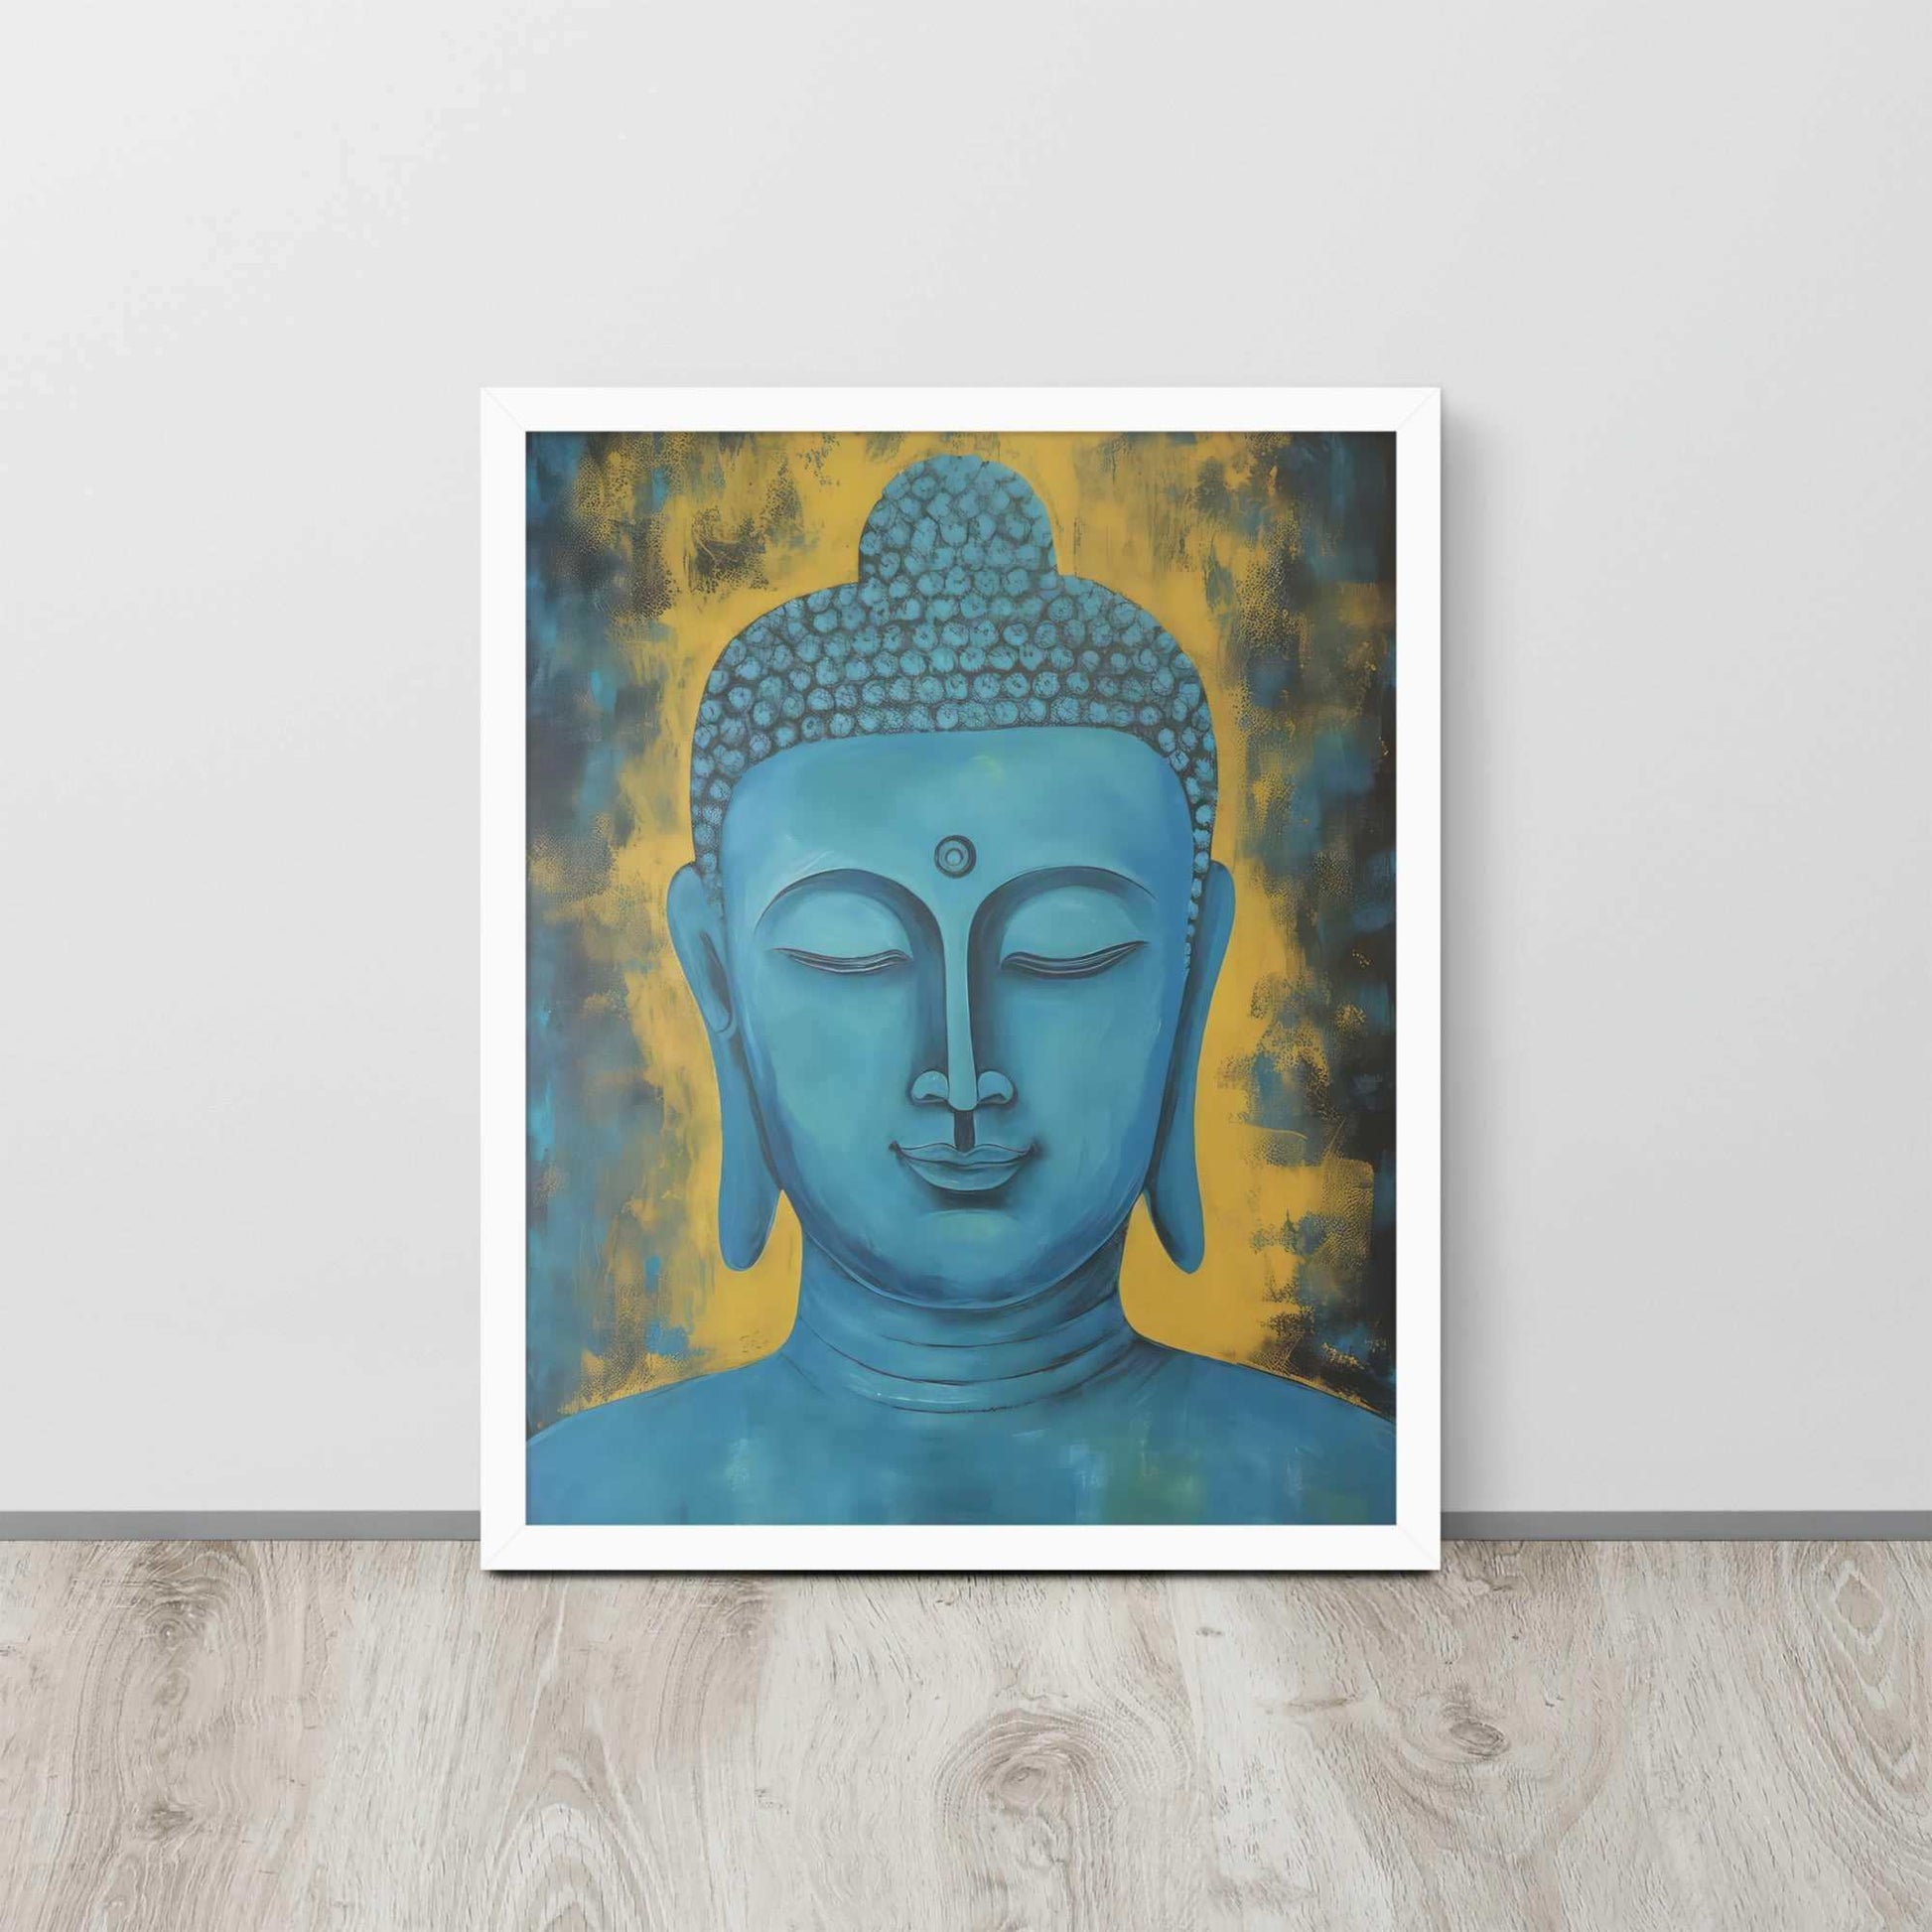 A white oak framed poster displays a Blue Buddha Healing Tibetan Art against a golden yellow background with dark, leaf-like impressions, creating a serene and contemplative artwork, propped on a light wooden floor against a white wall.